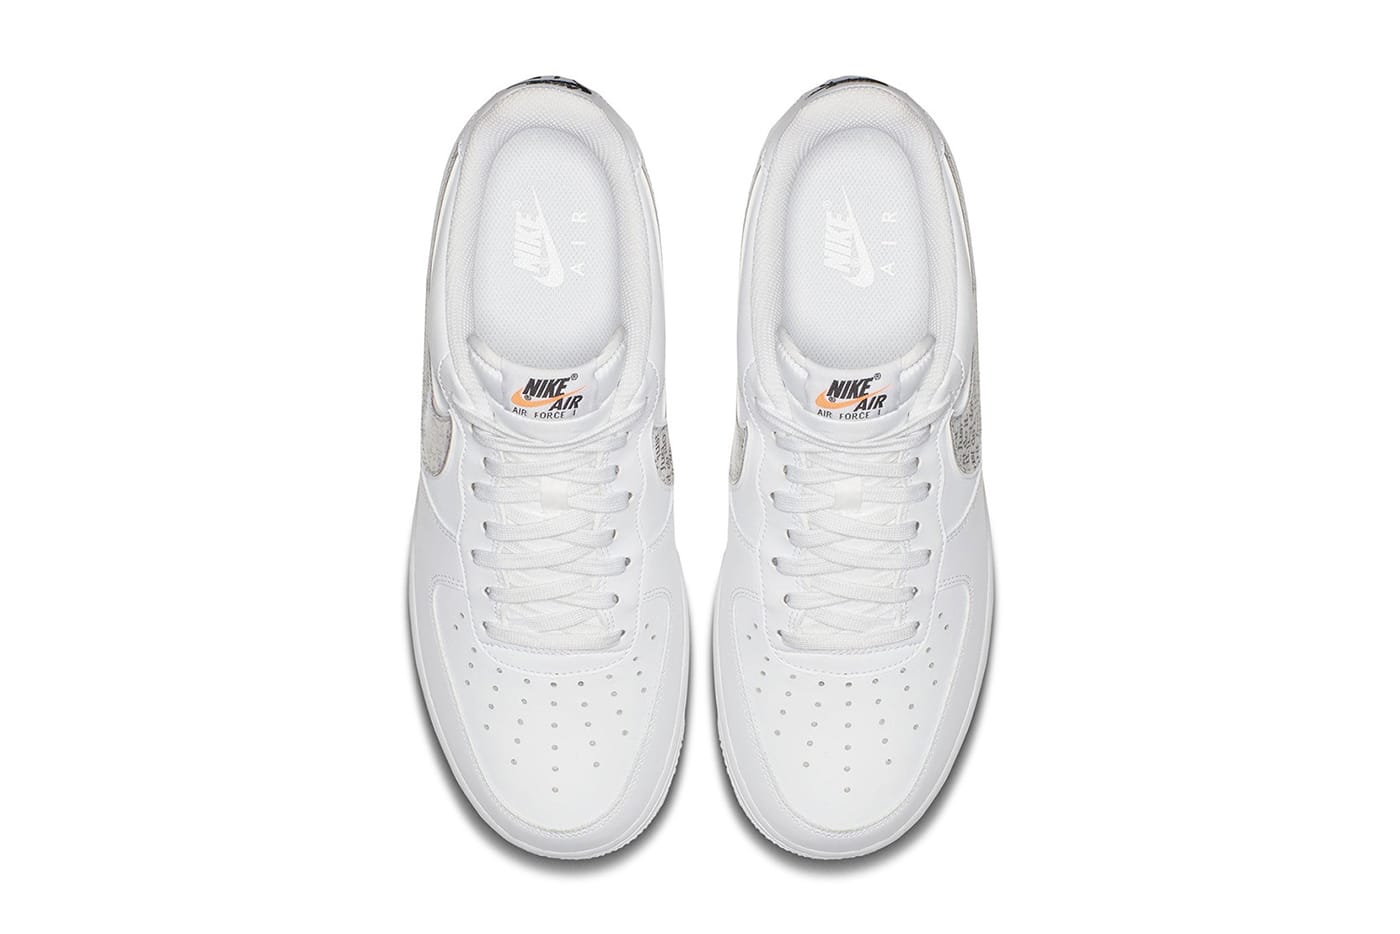 nike air force low just do it white